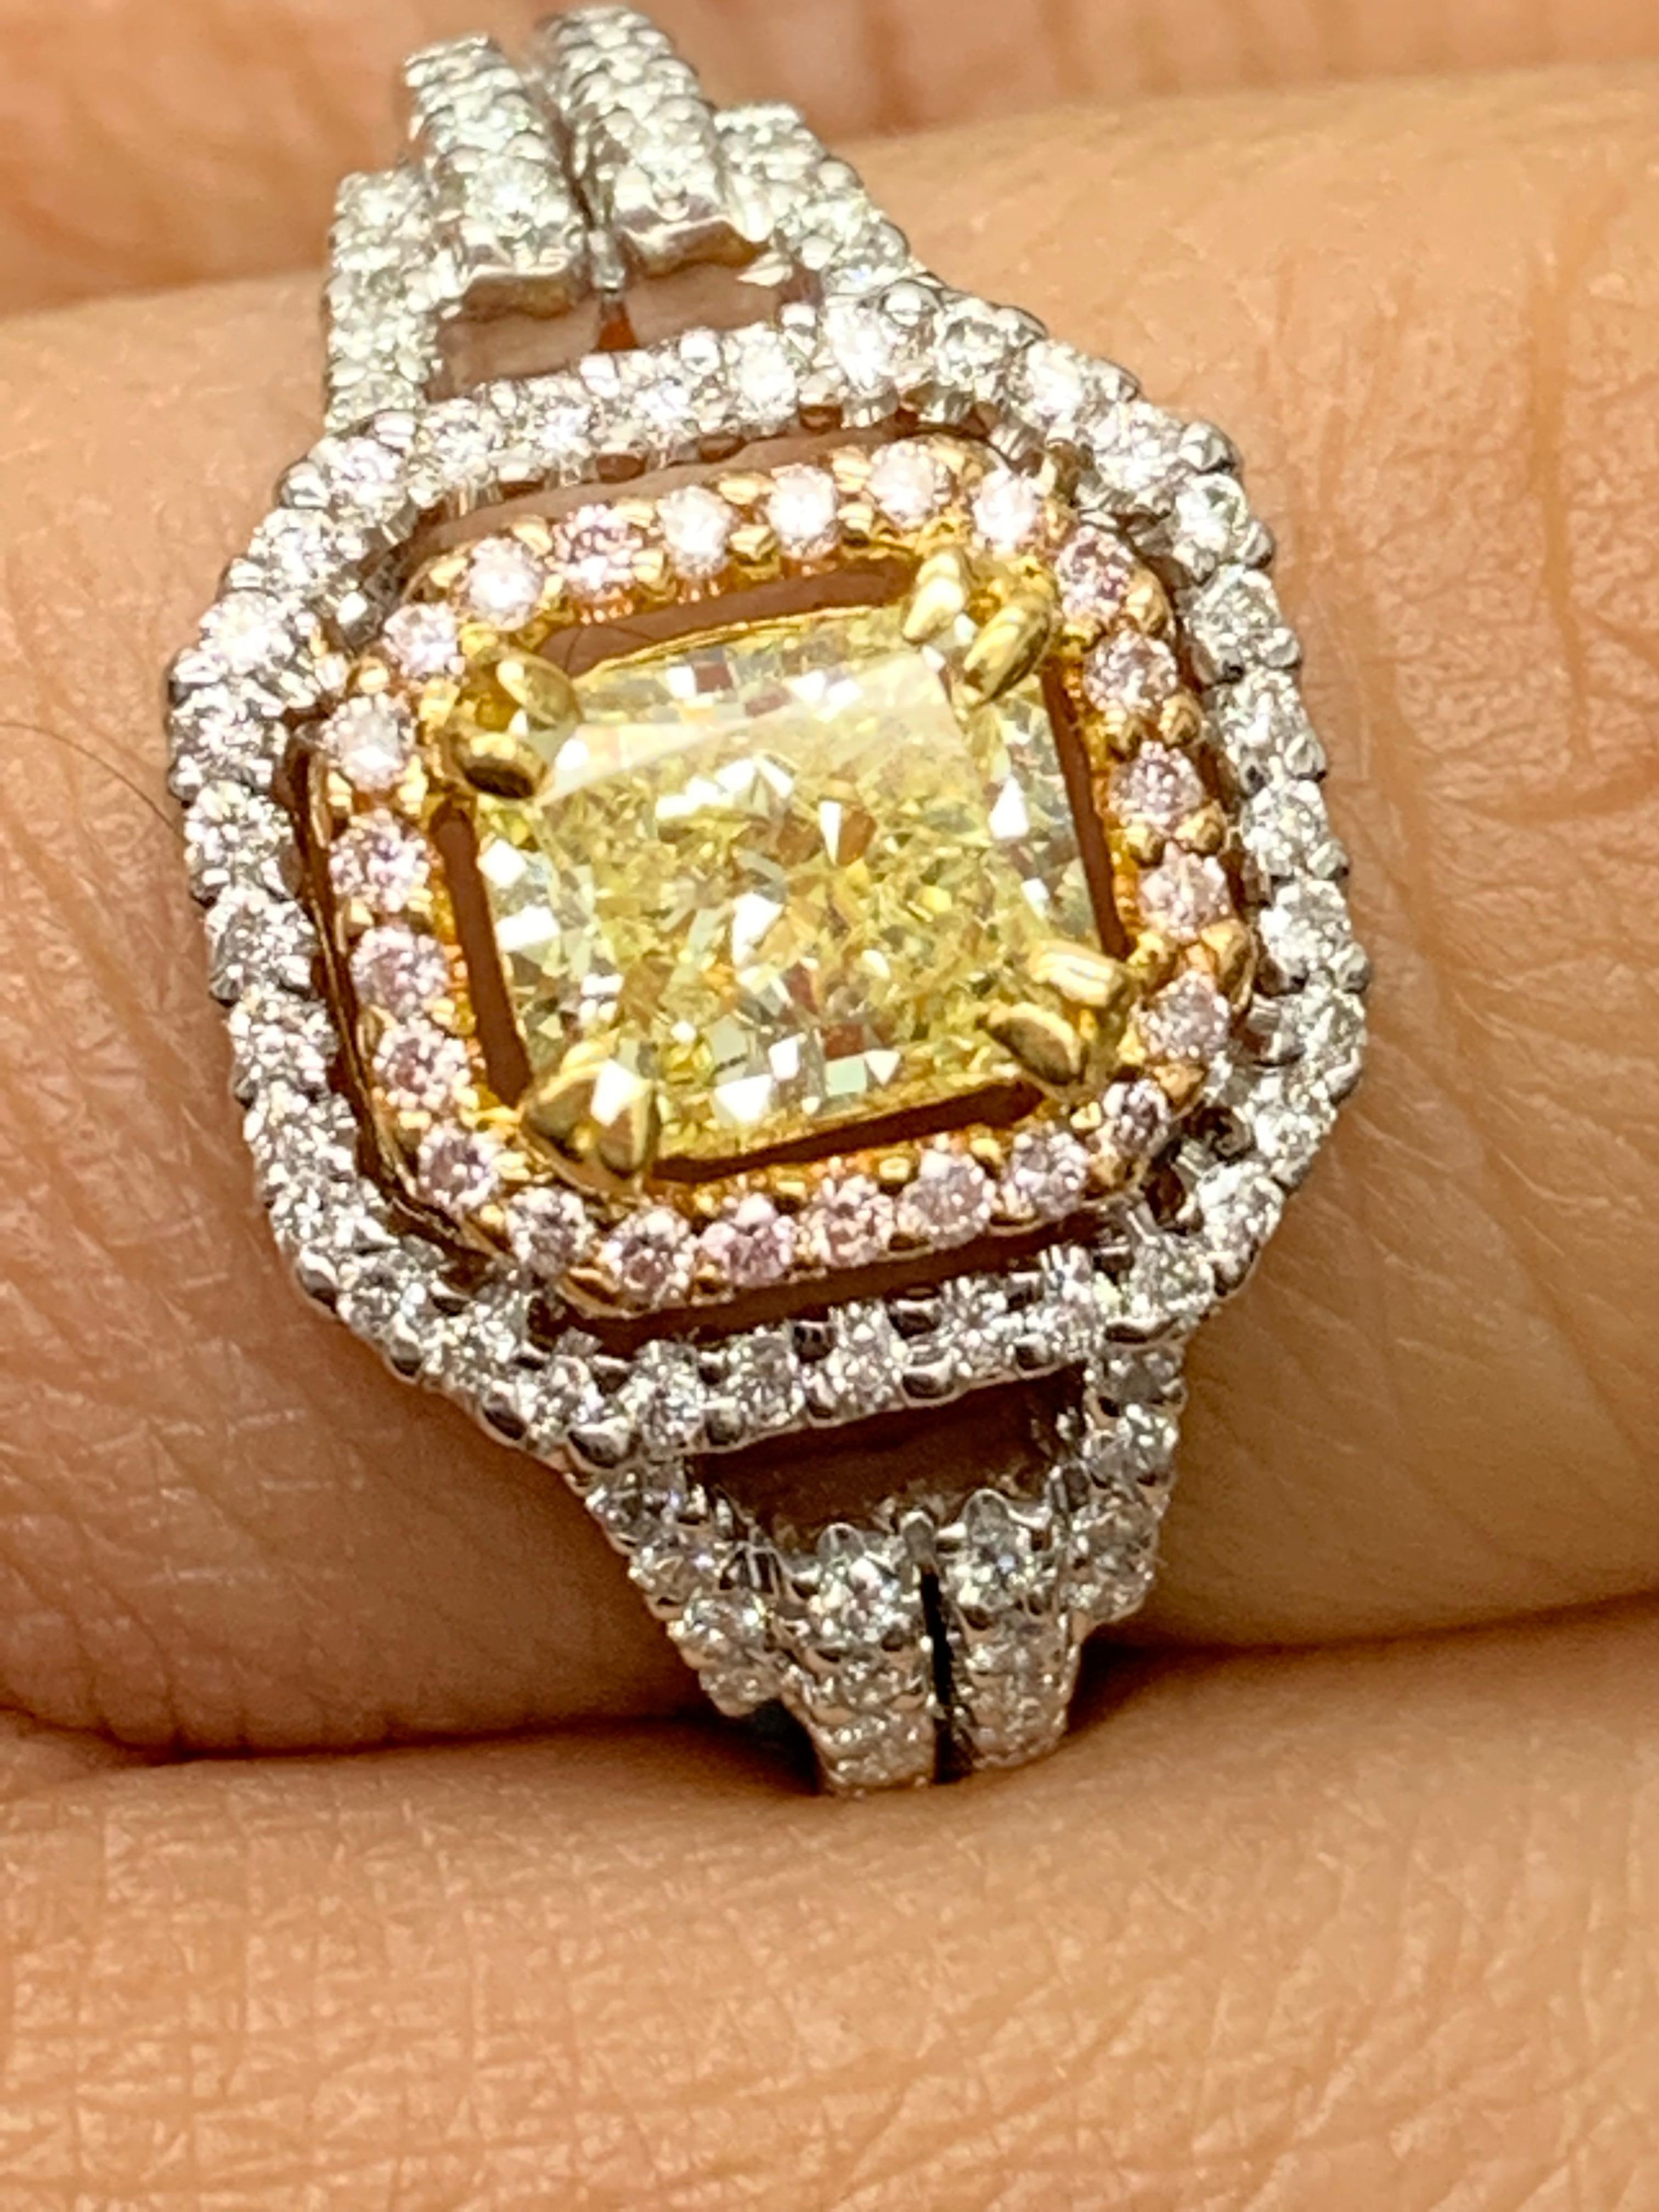 1 Carat Emerald Cut Yellow Diamond Ring in 18k Mix Gold For Sale 9